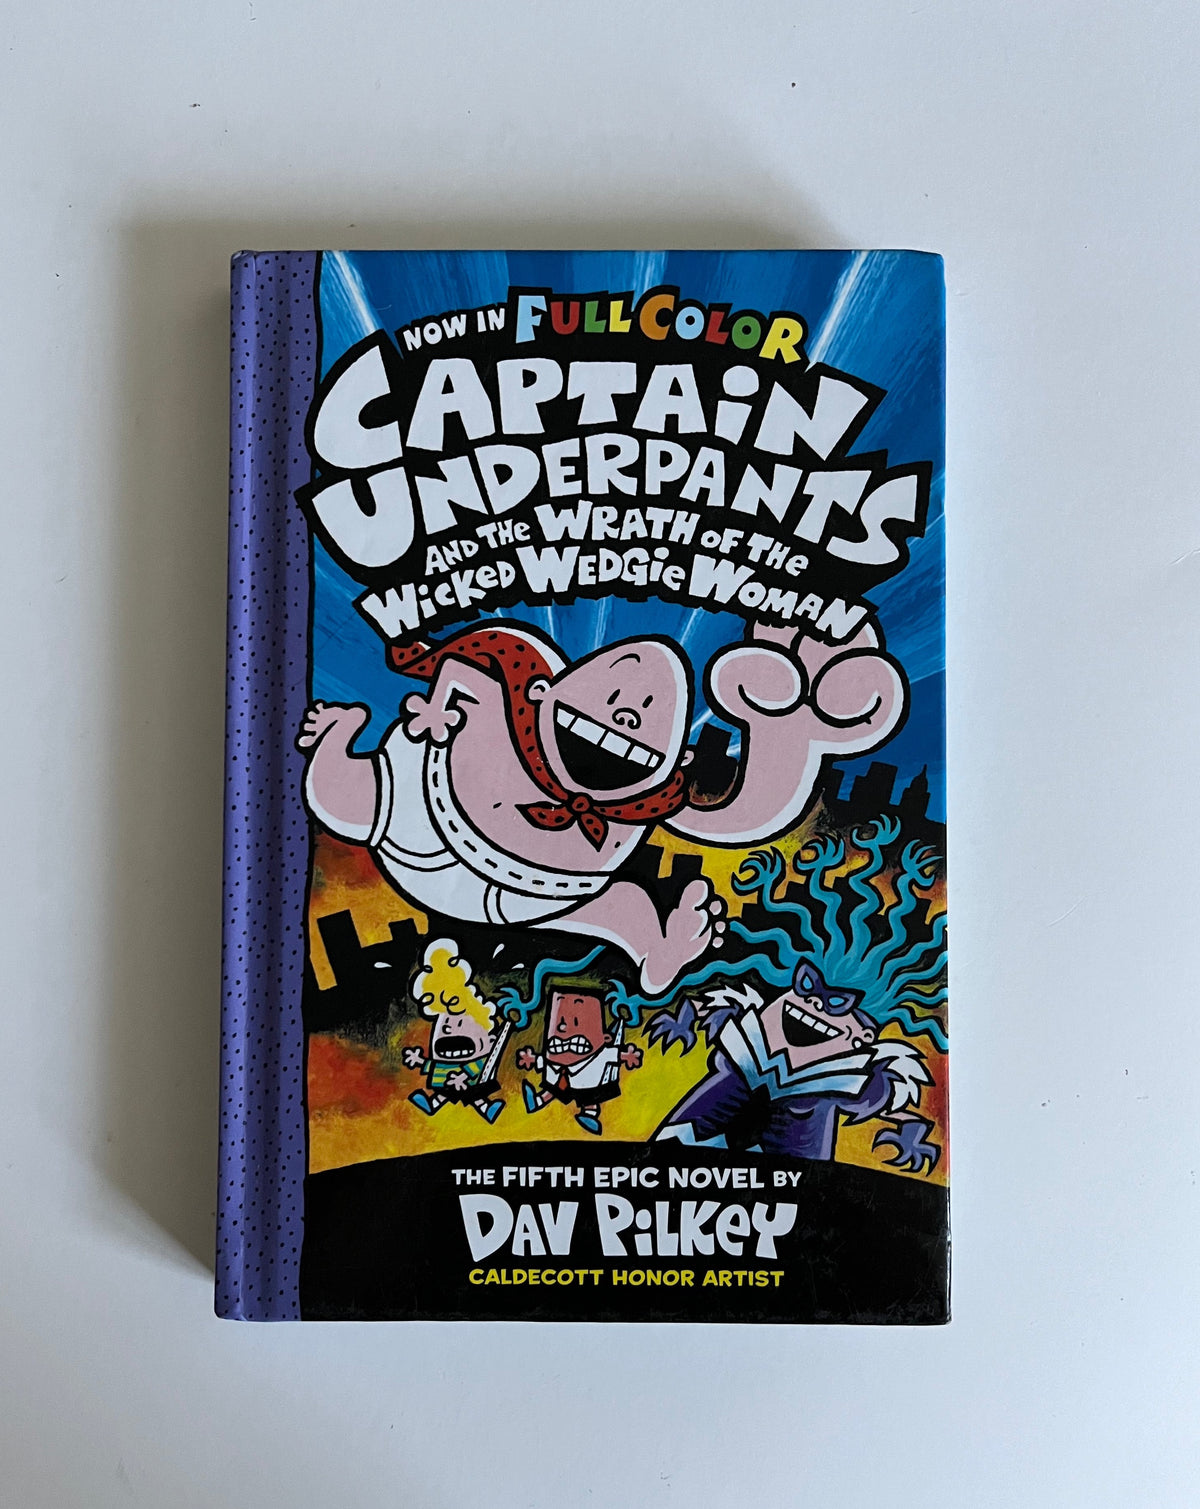 The Adventures of Captain Underpants: and The Wrath of the Wicked Wedgie Woman by Dav Pilkey